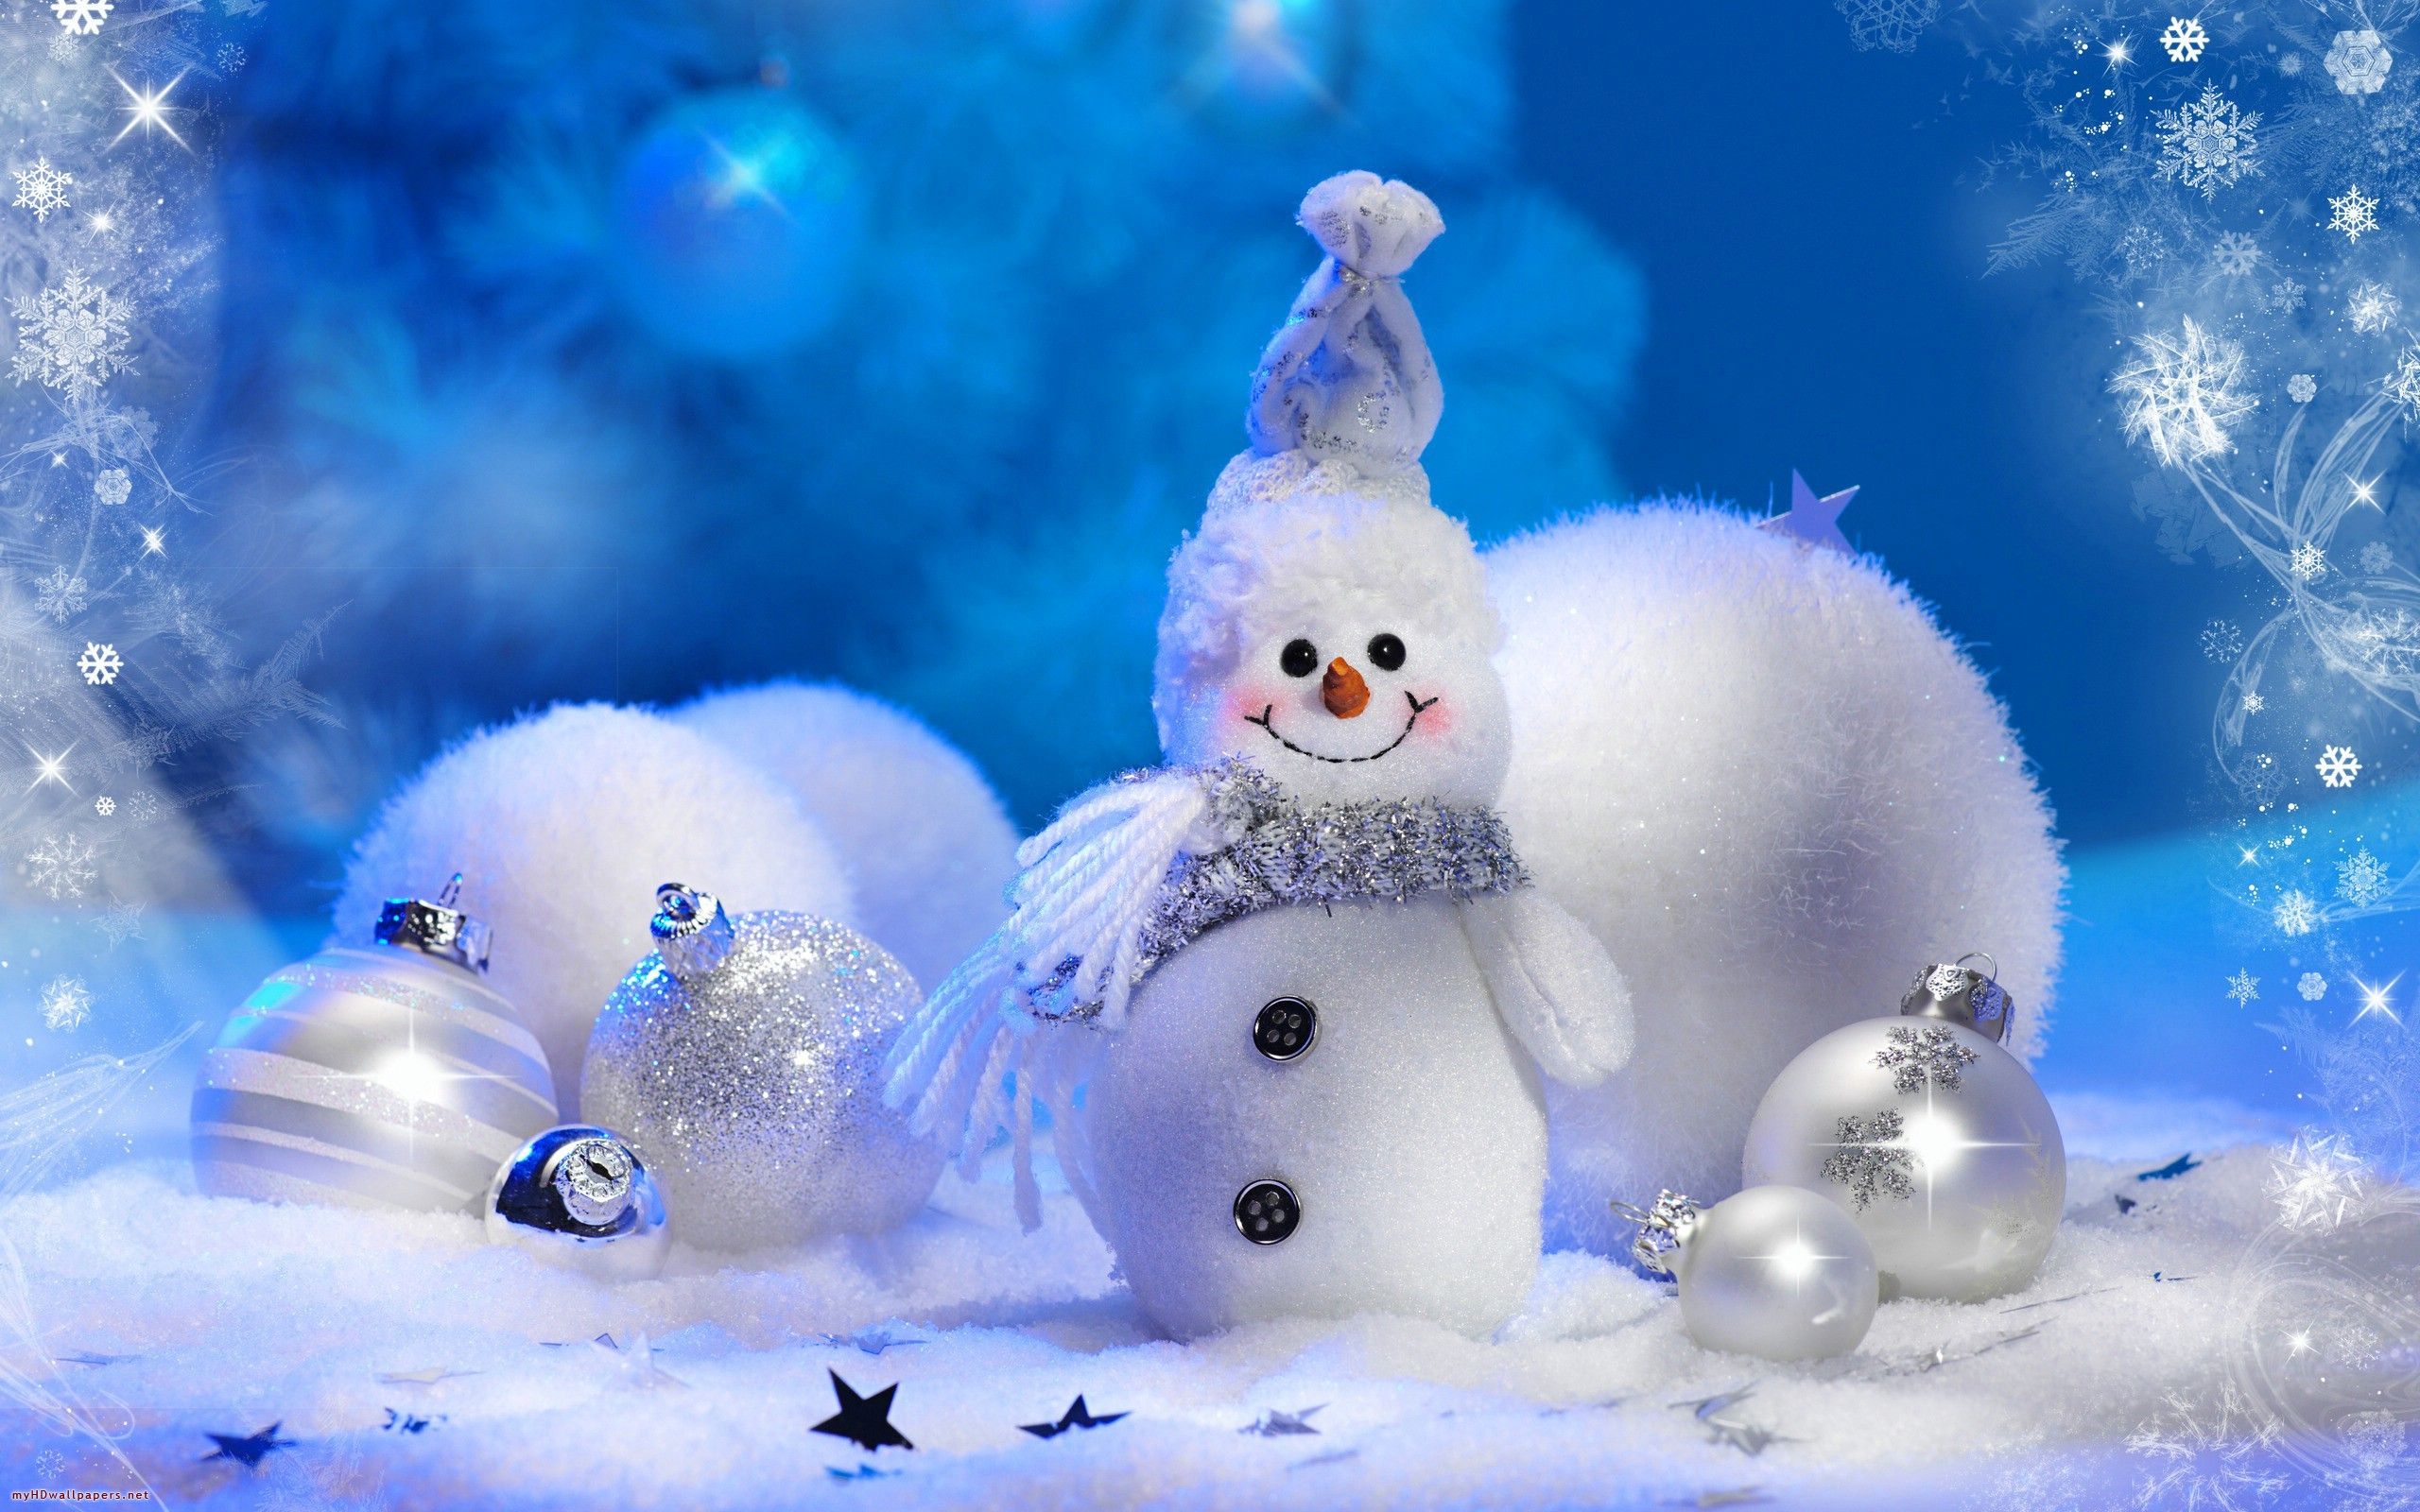 526 Christmas Live Wallpaper Stock Video Footage  4K and HD Video Clips   Shutterstock